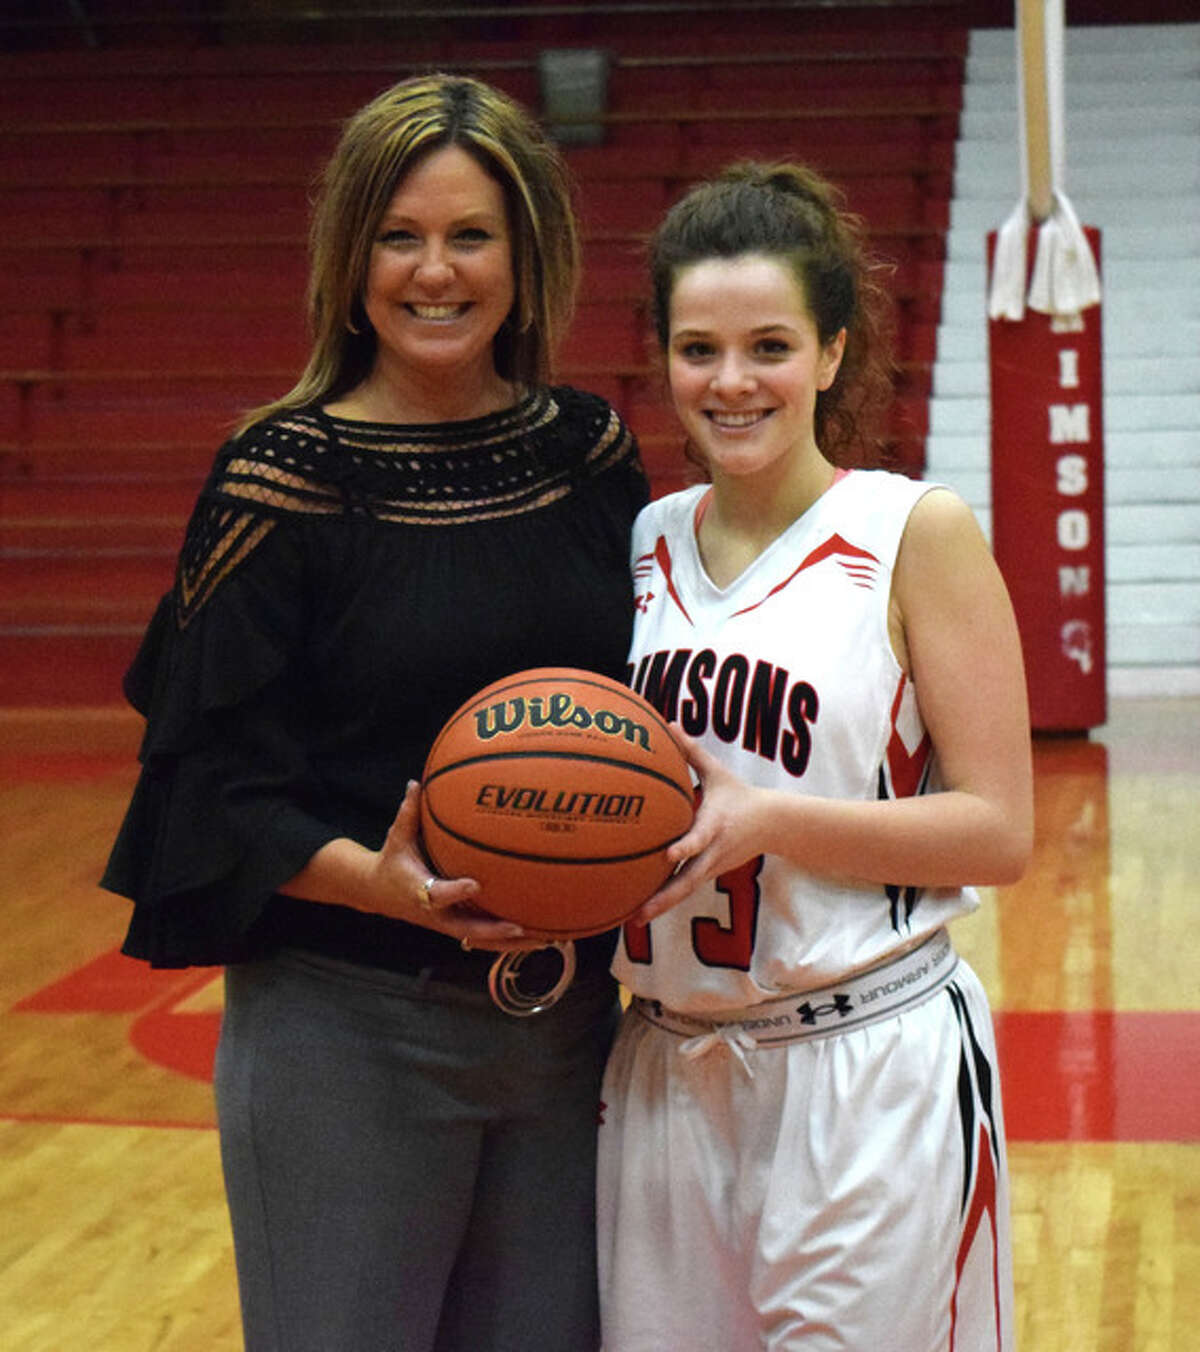 Jacksonville High’s Olivia Kaufmann poses with Jacksonville head coach Jeannette Barlow after Kaufmann scored the 2,000th point of her career in the Crimsons’ loss to Chatham Glenwood at the JHS Bowl Wednesday night.